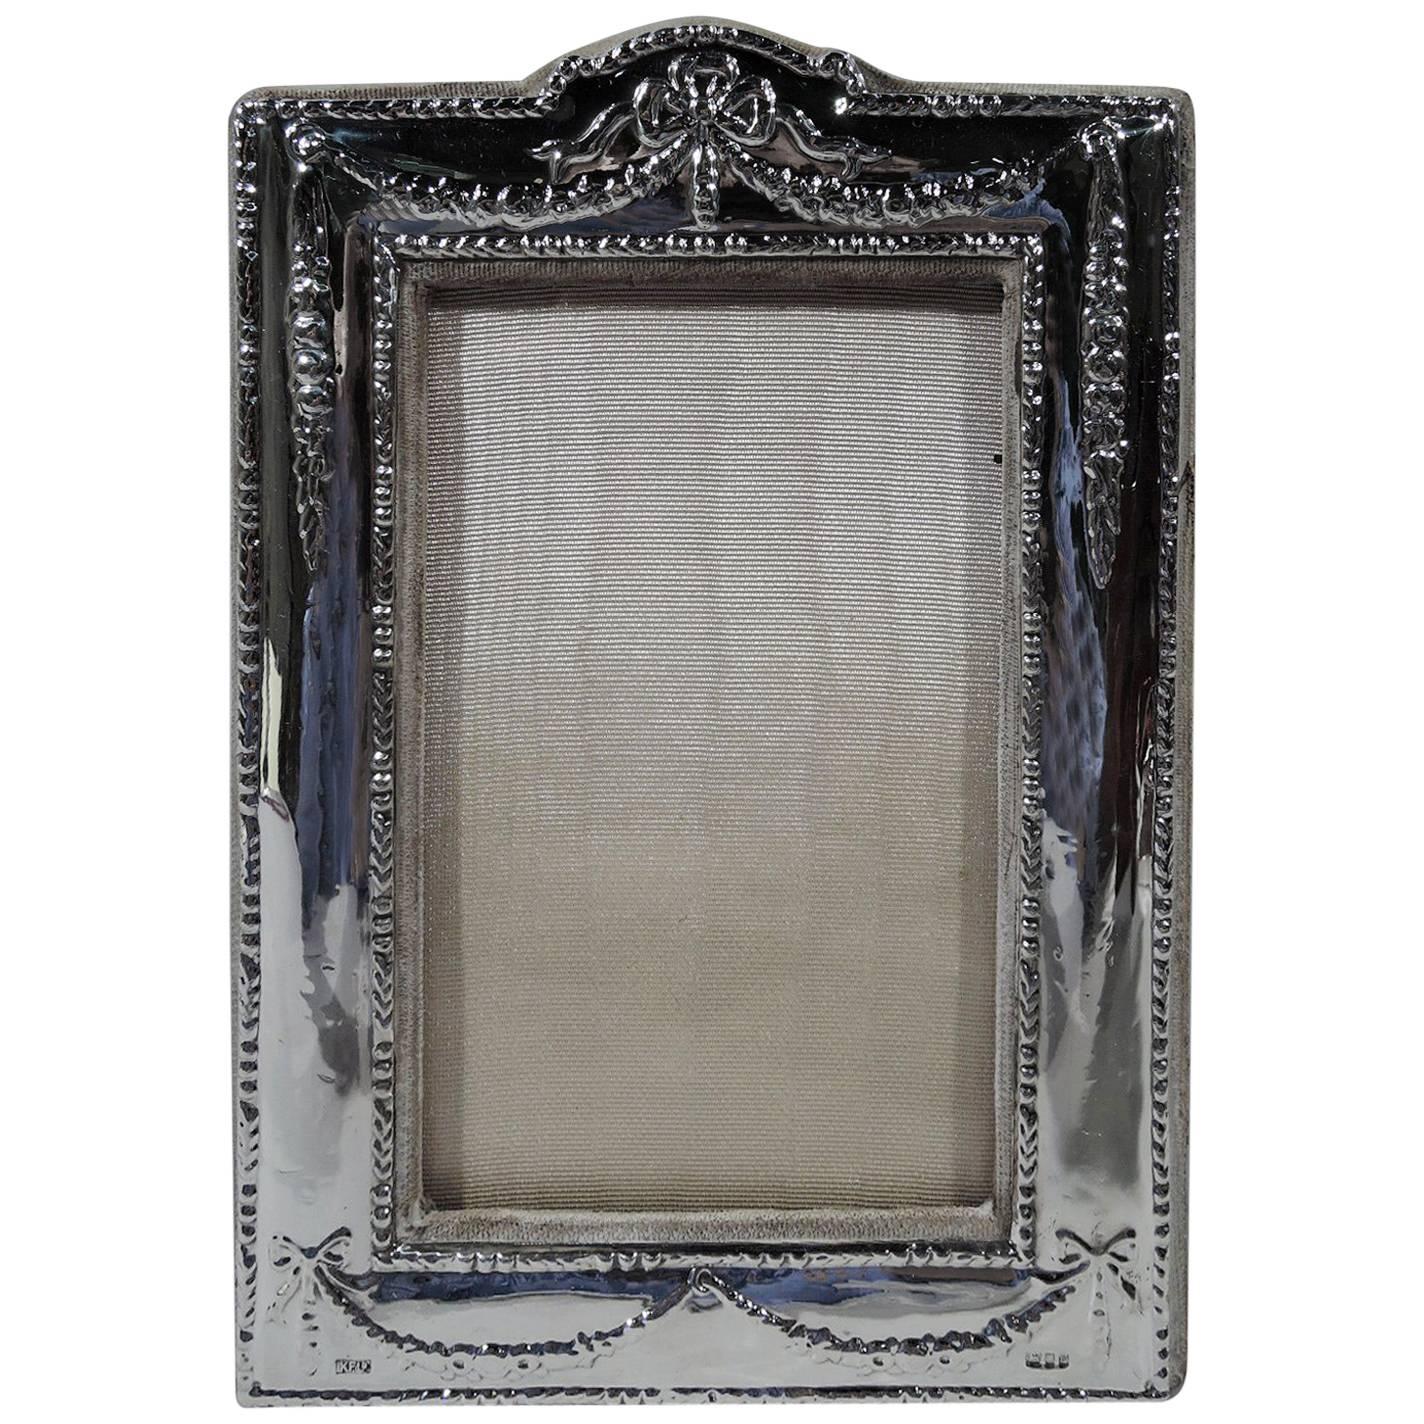 Old Fashioned English Sterling Silver Boudoir Picture Frame